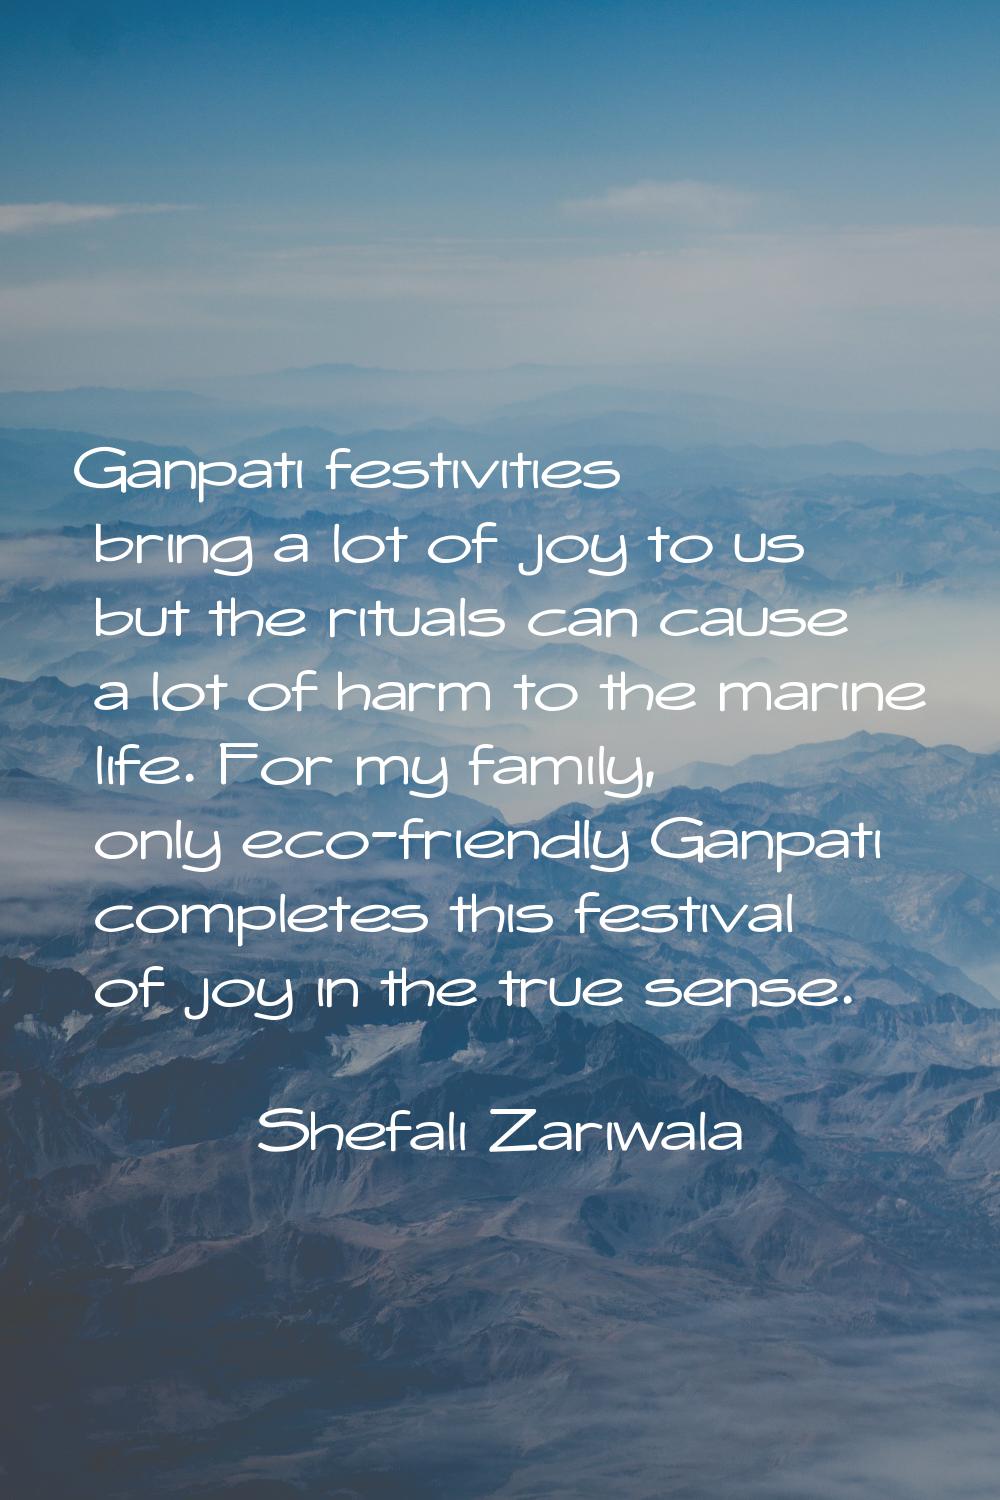 Ganpati festivities bring a lot of joy to us but the rituals can cause a lot of harm to the marine 